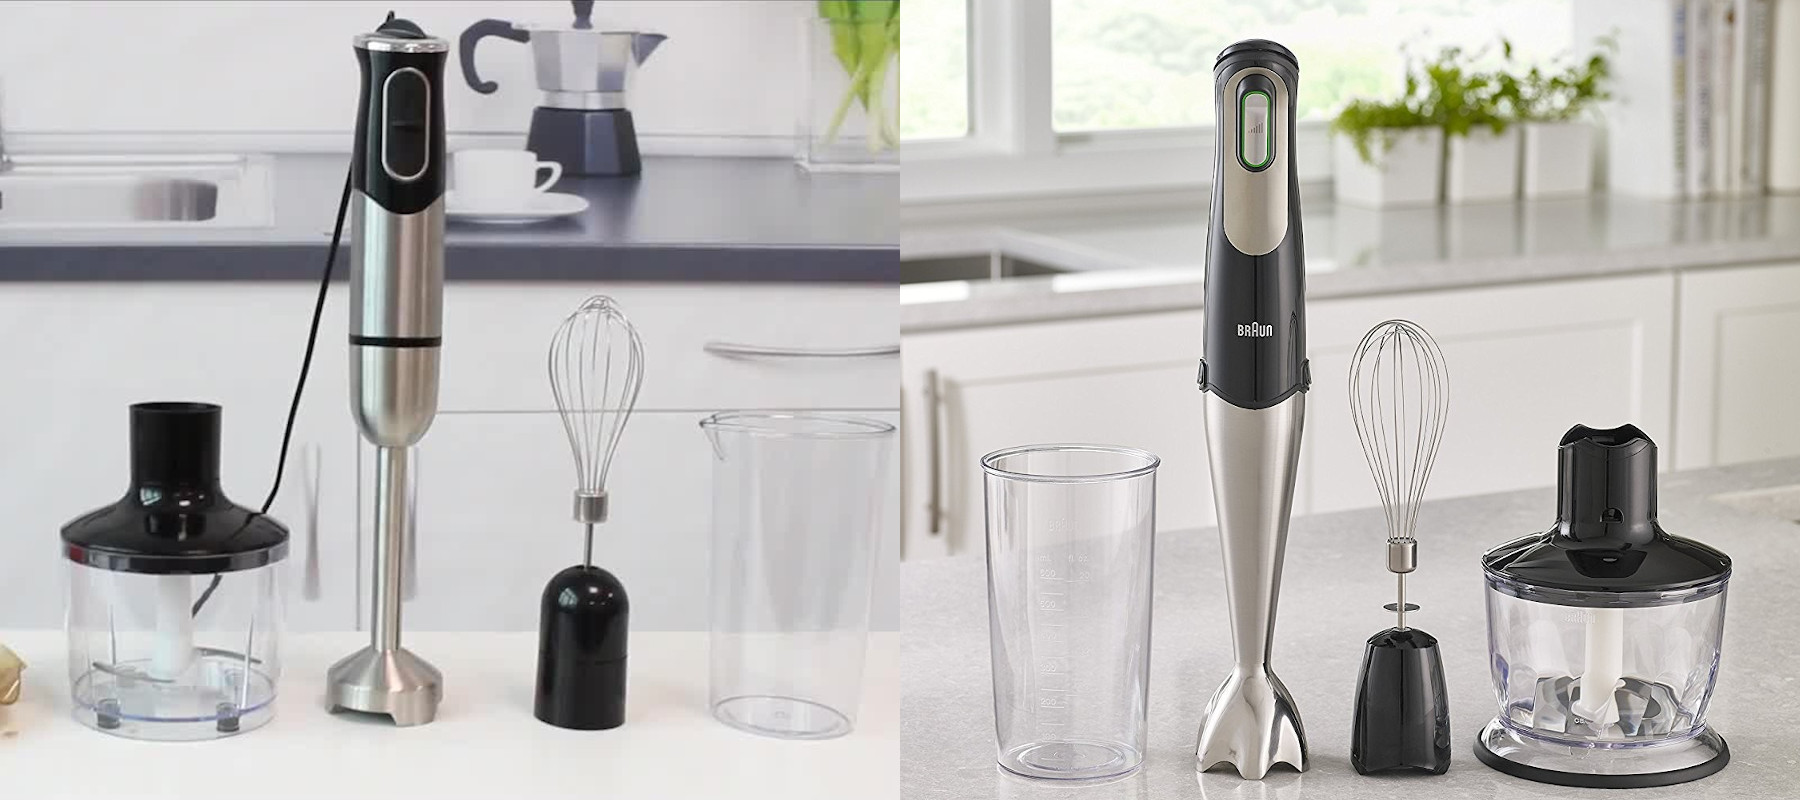  Braun MultiQuick 5 Maker and Hand Blender Patented Technology -  Powerful 350 Watt - Dual Speed - Includes Beaker, Whisk, 2-Cup Chopper,  Silicon Baby Food Freezer Tray, Spatula: Home & Kitchen